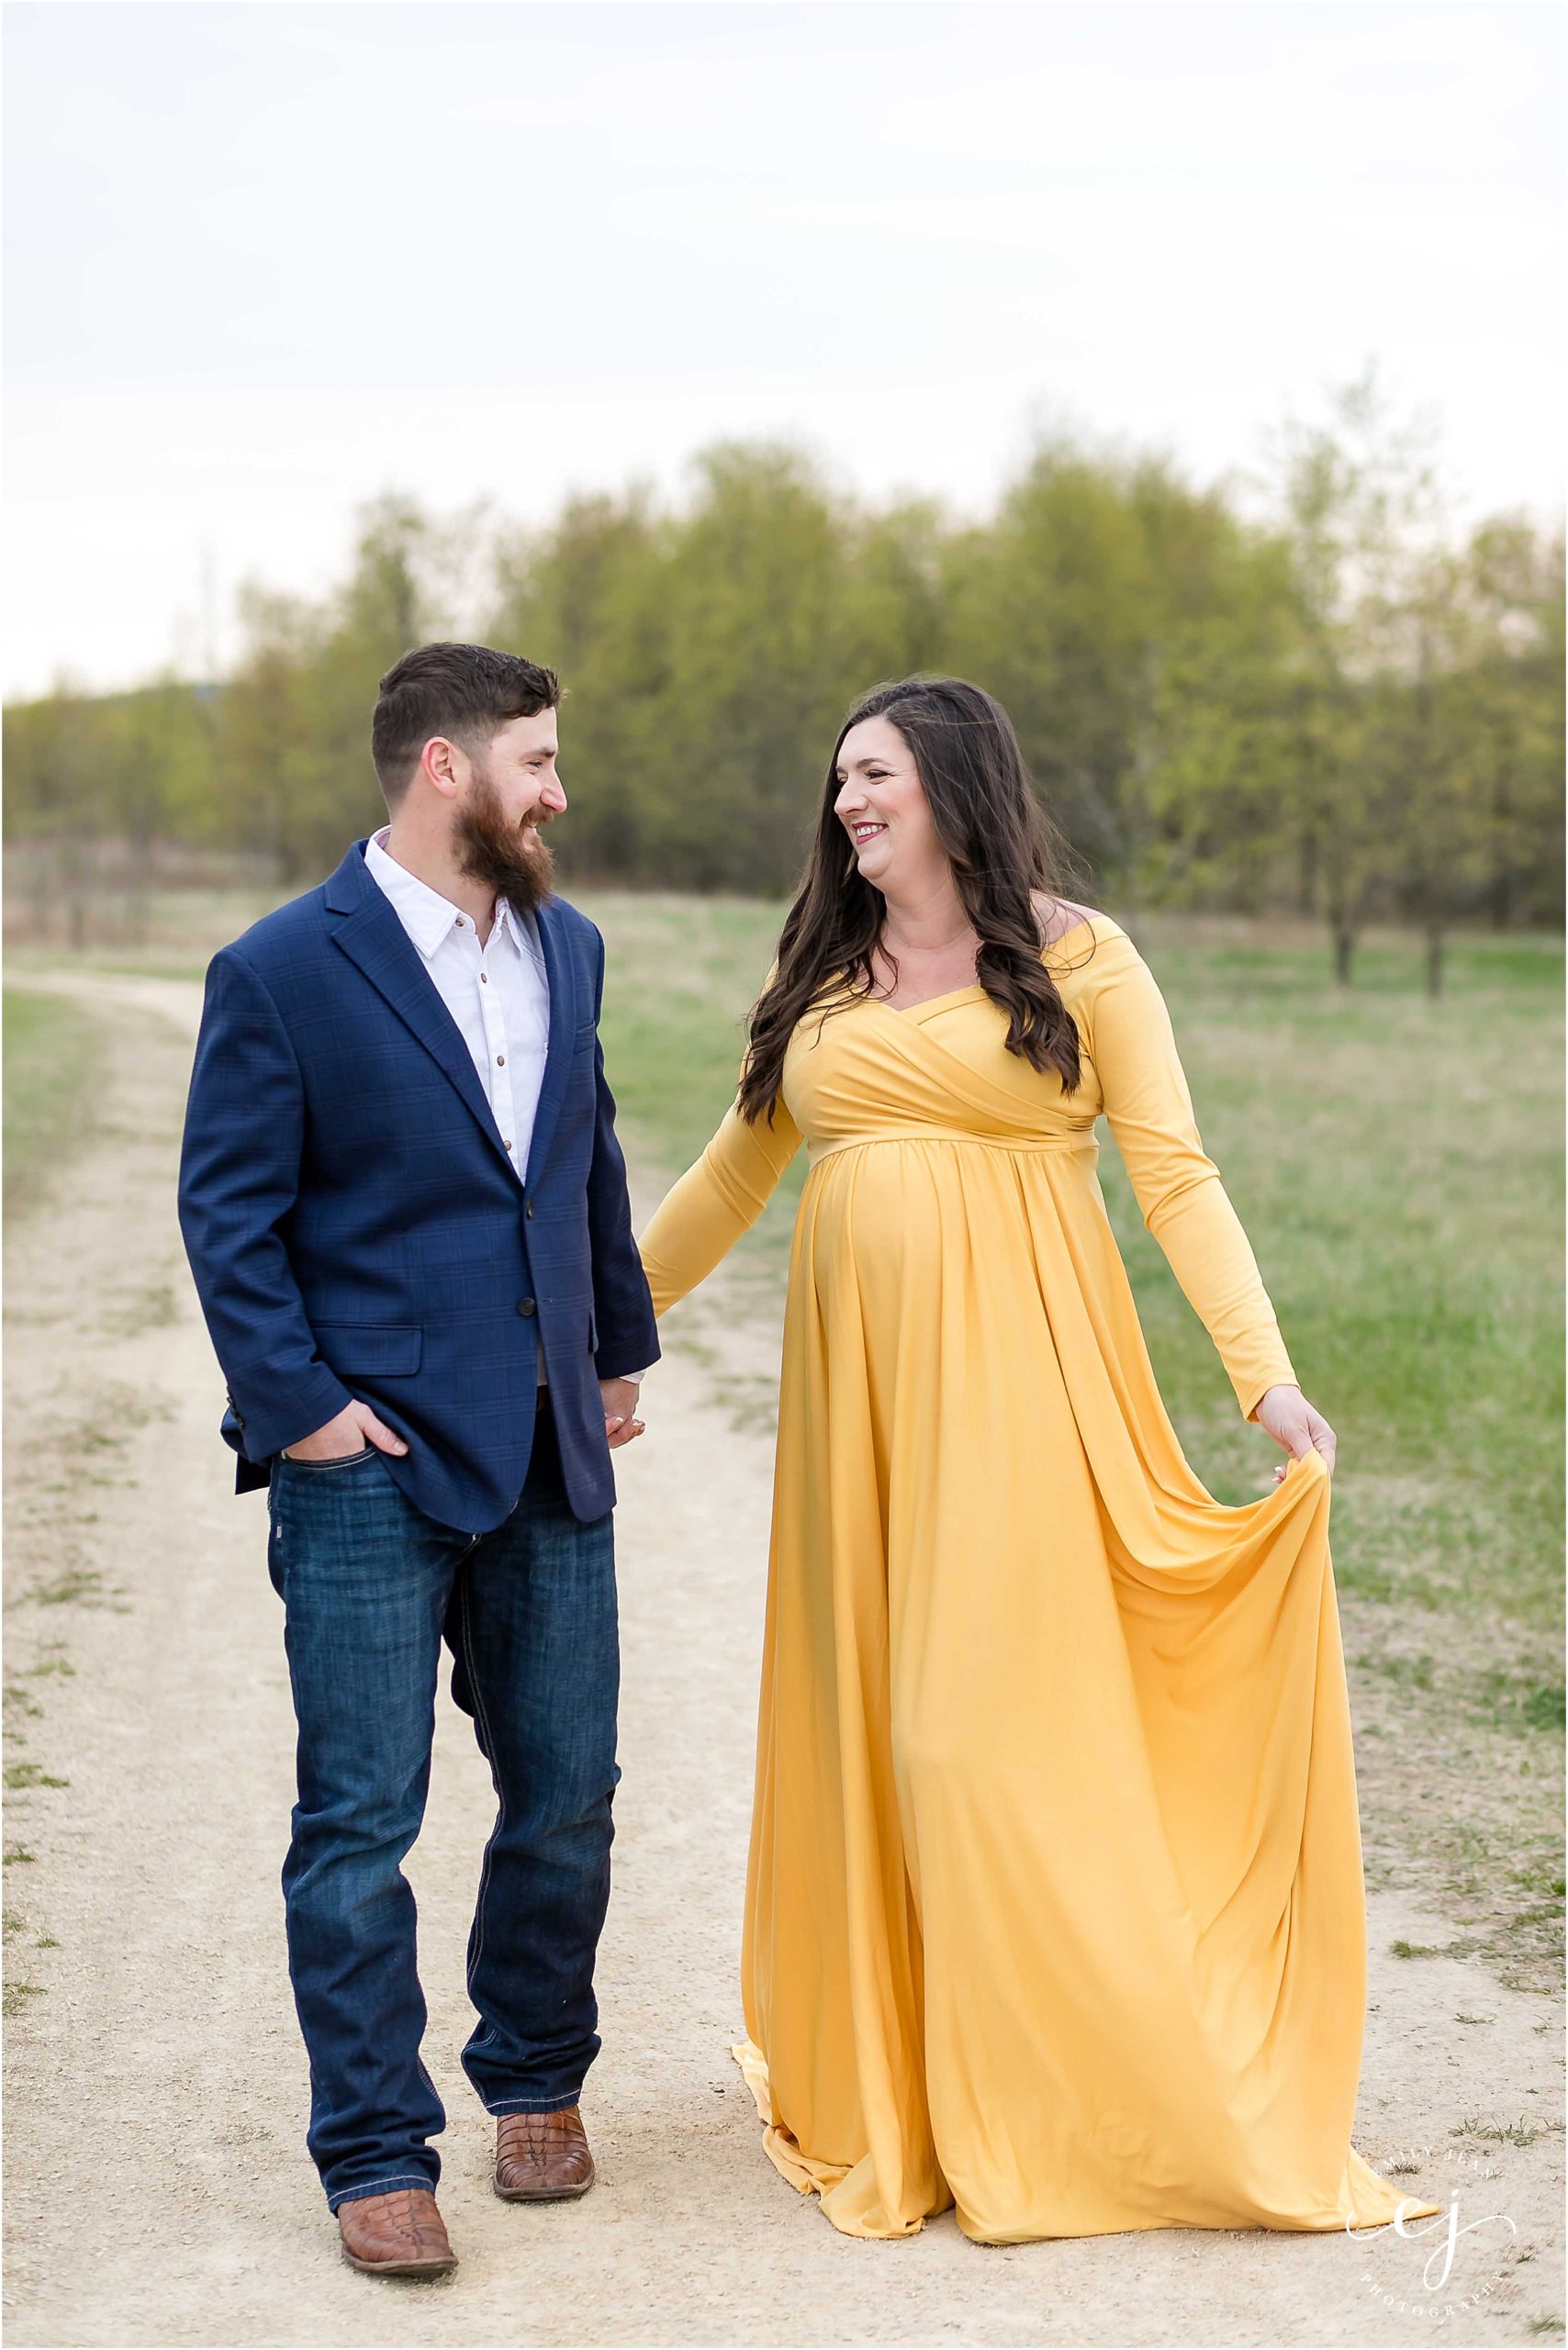 Man and woman holding hands walking maternity photo